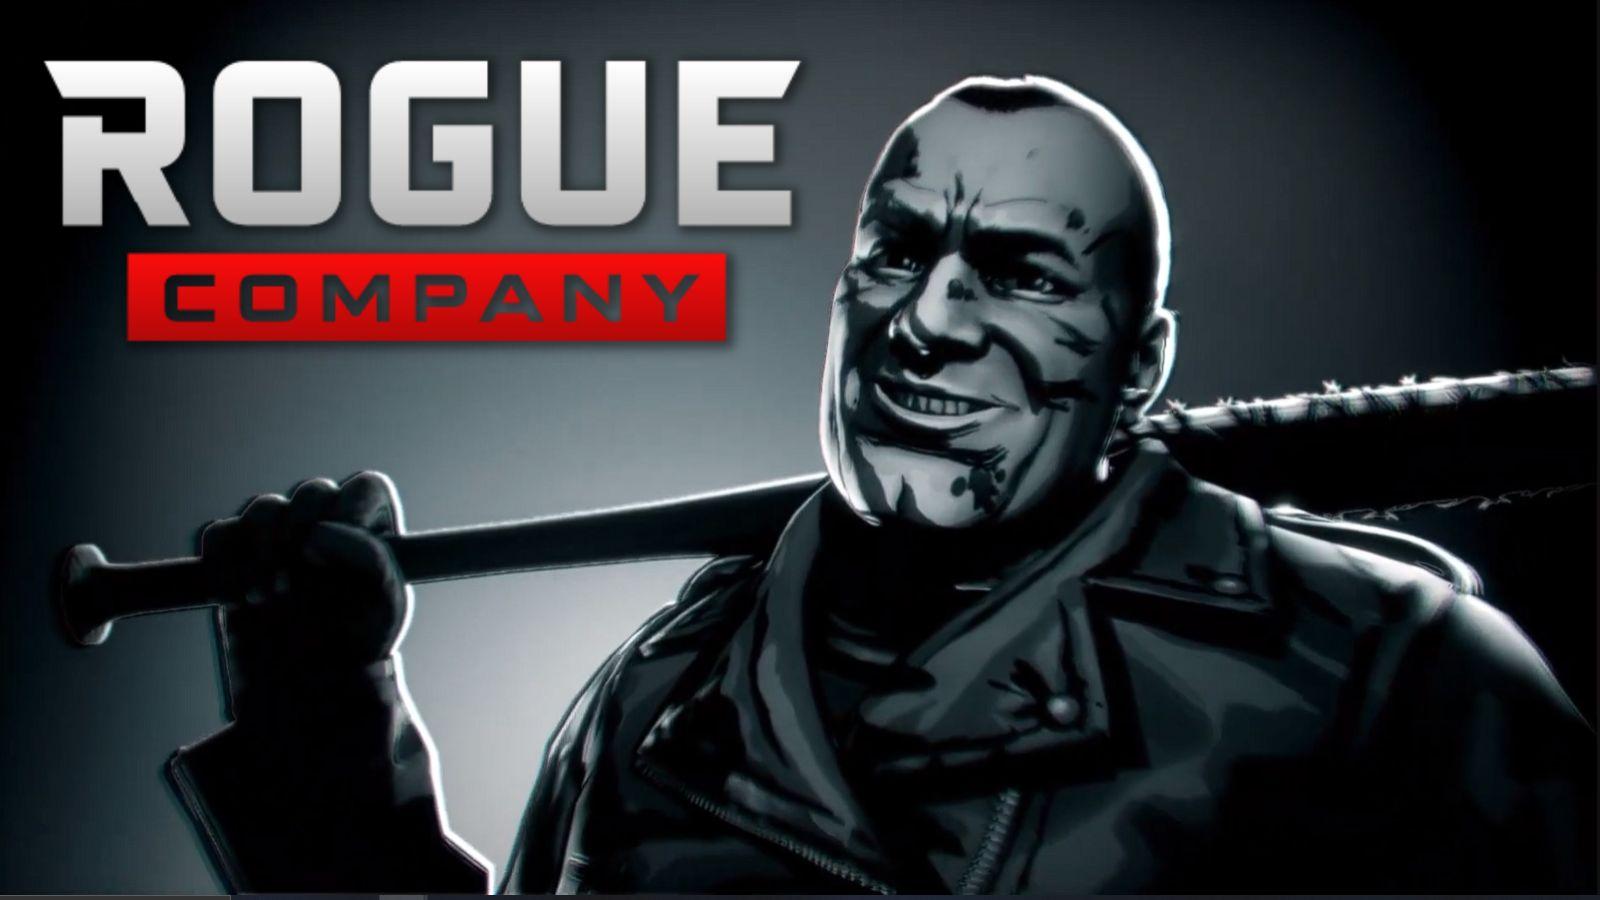 Rogue Company is the casual, stress-free shooter I needed right now